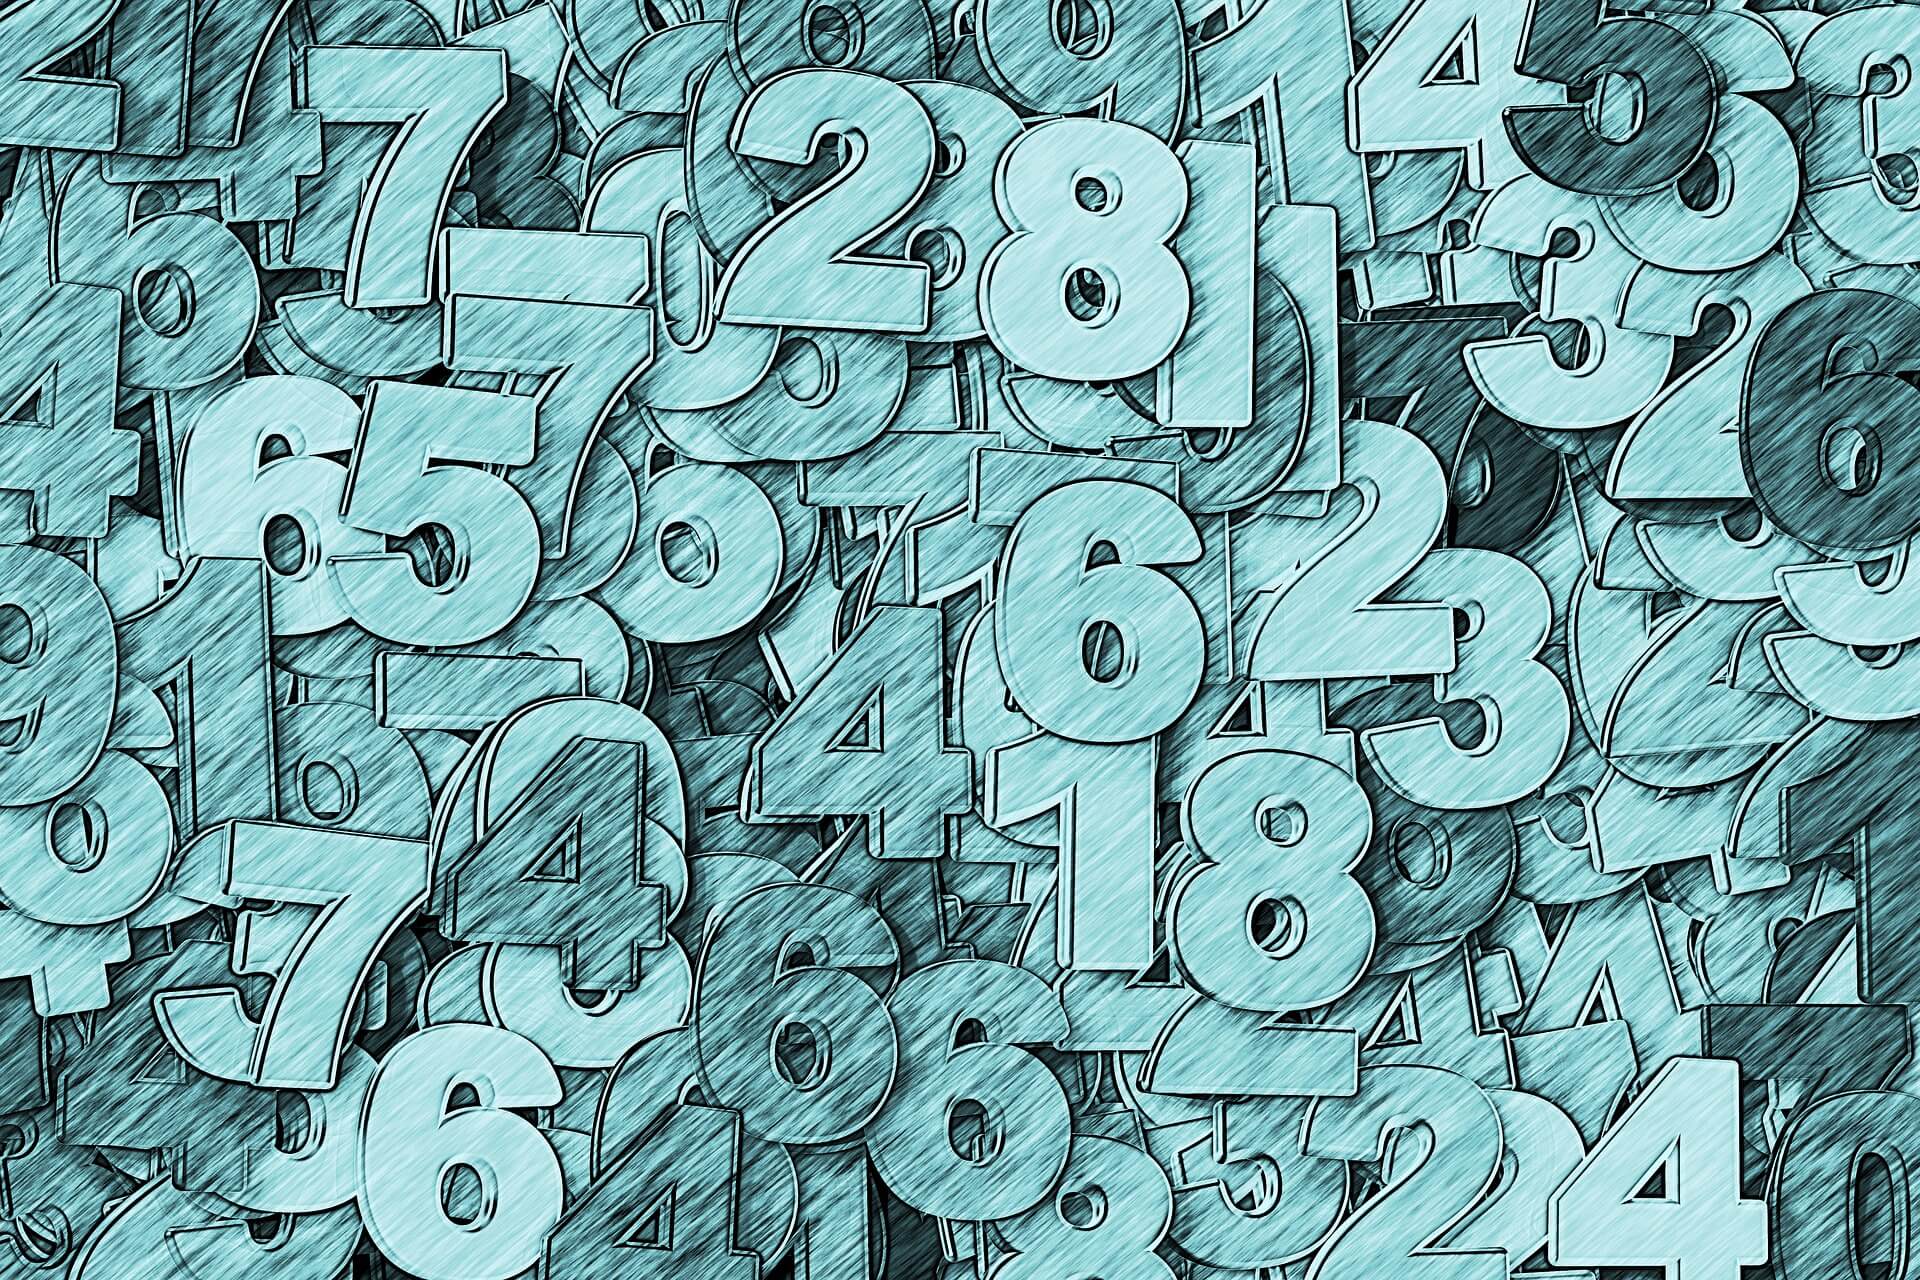 numbers against a light background